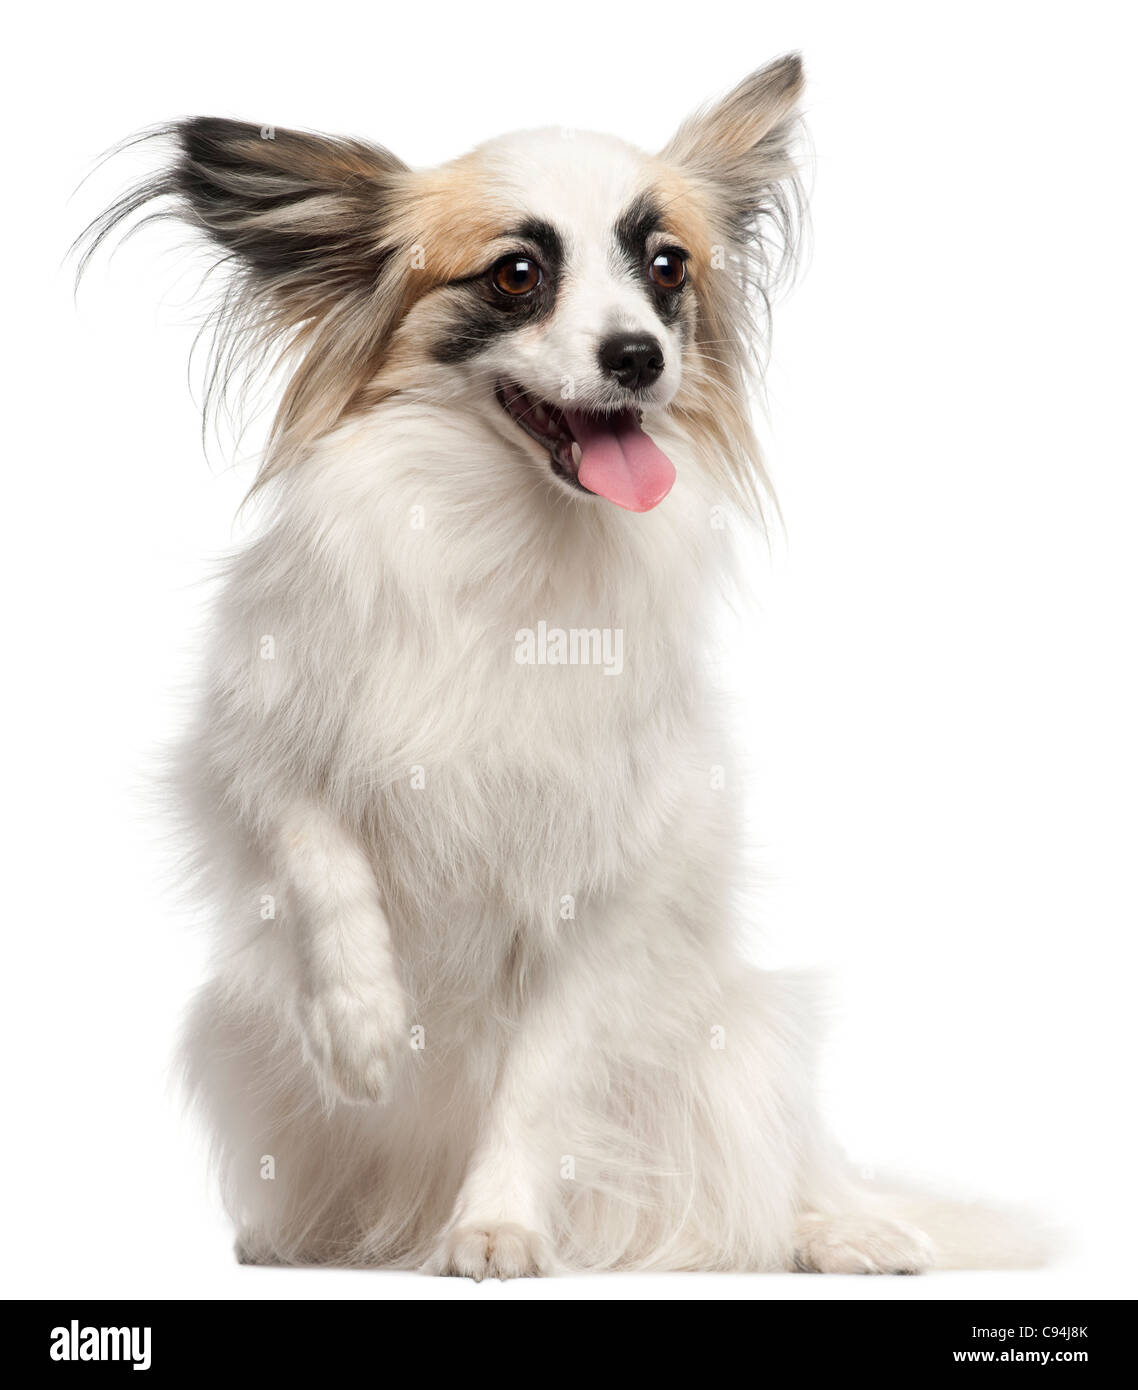 Papillon, 15 months old, sitting in front of white background Stock Photo